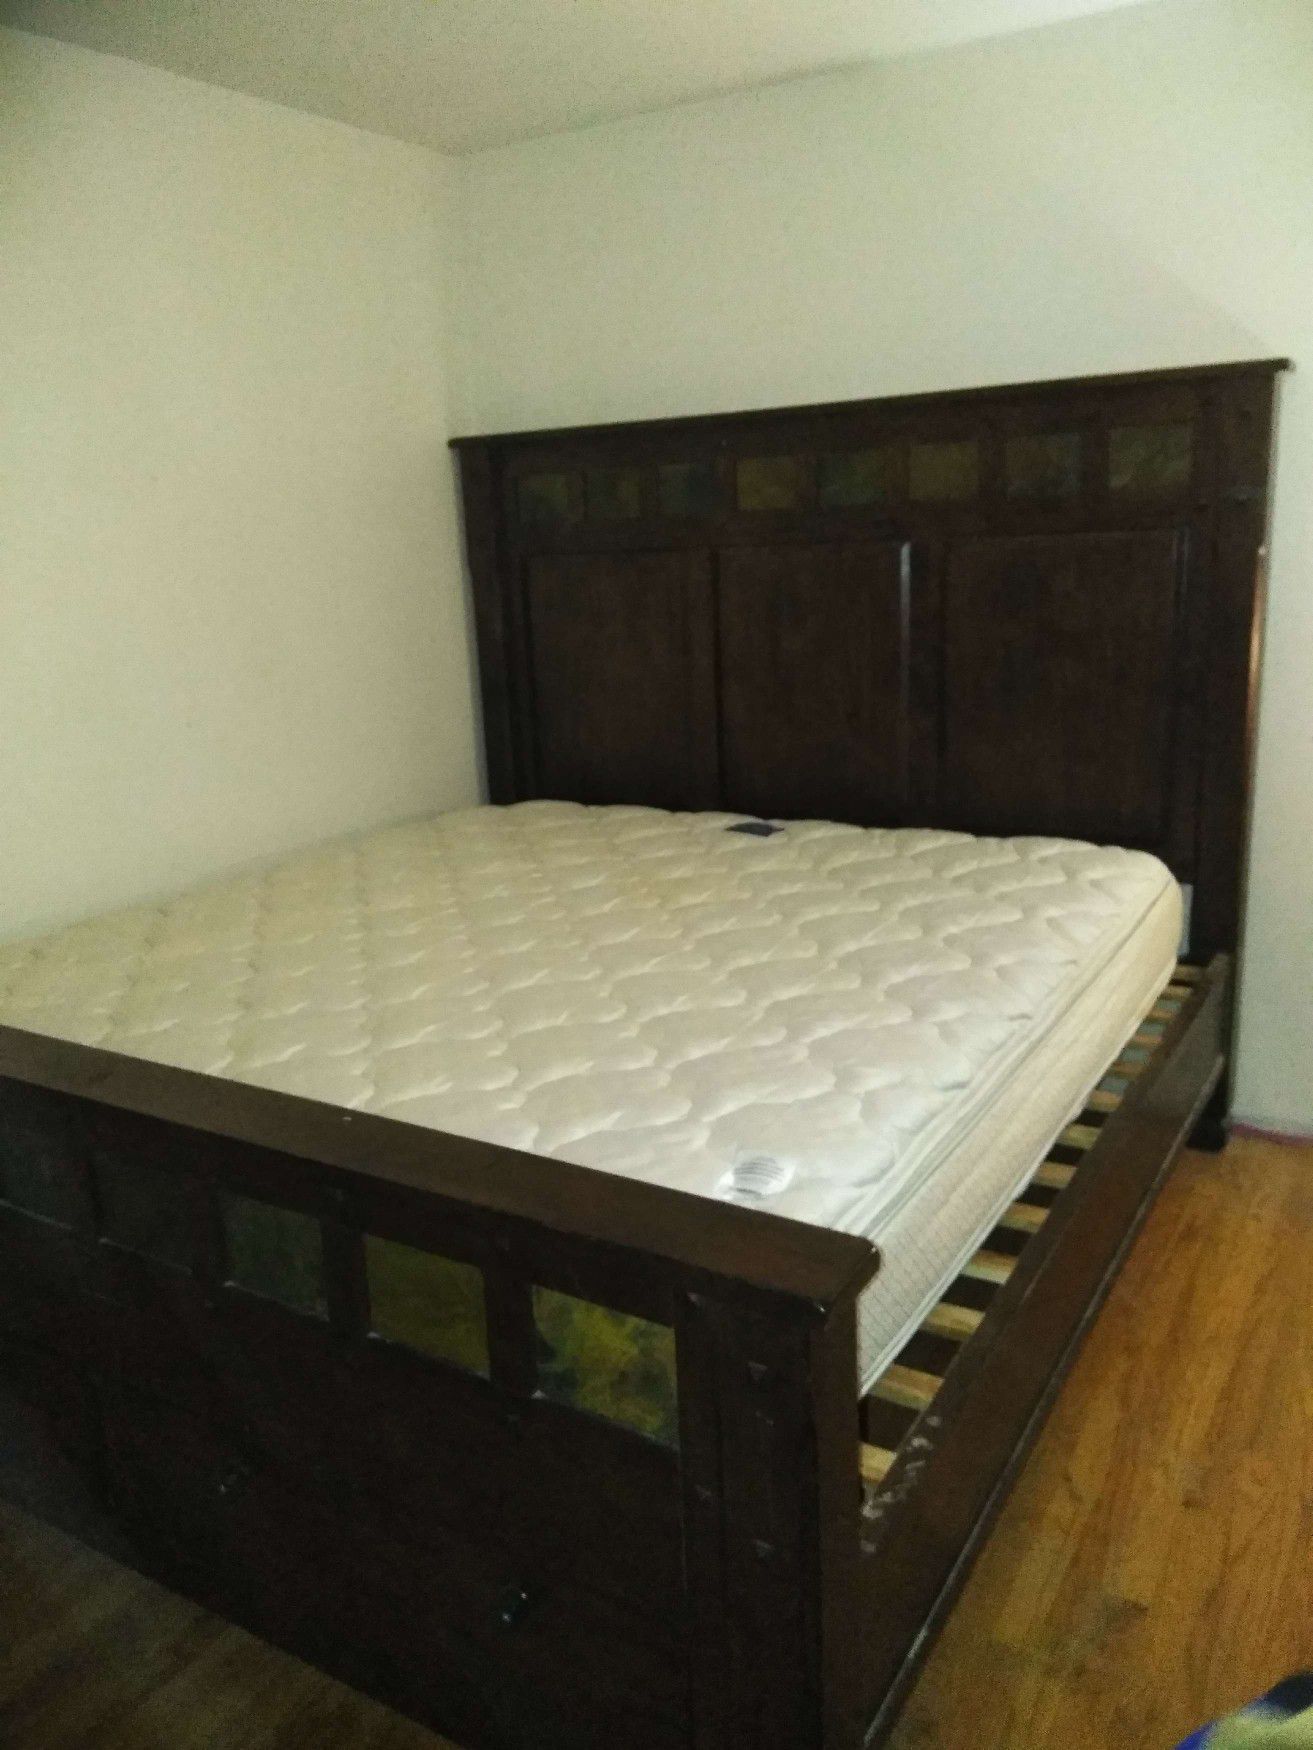 King Bed frame and mattress with 42 in tv and night stand0